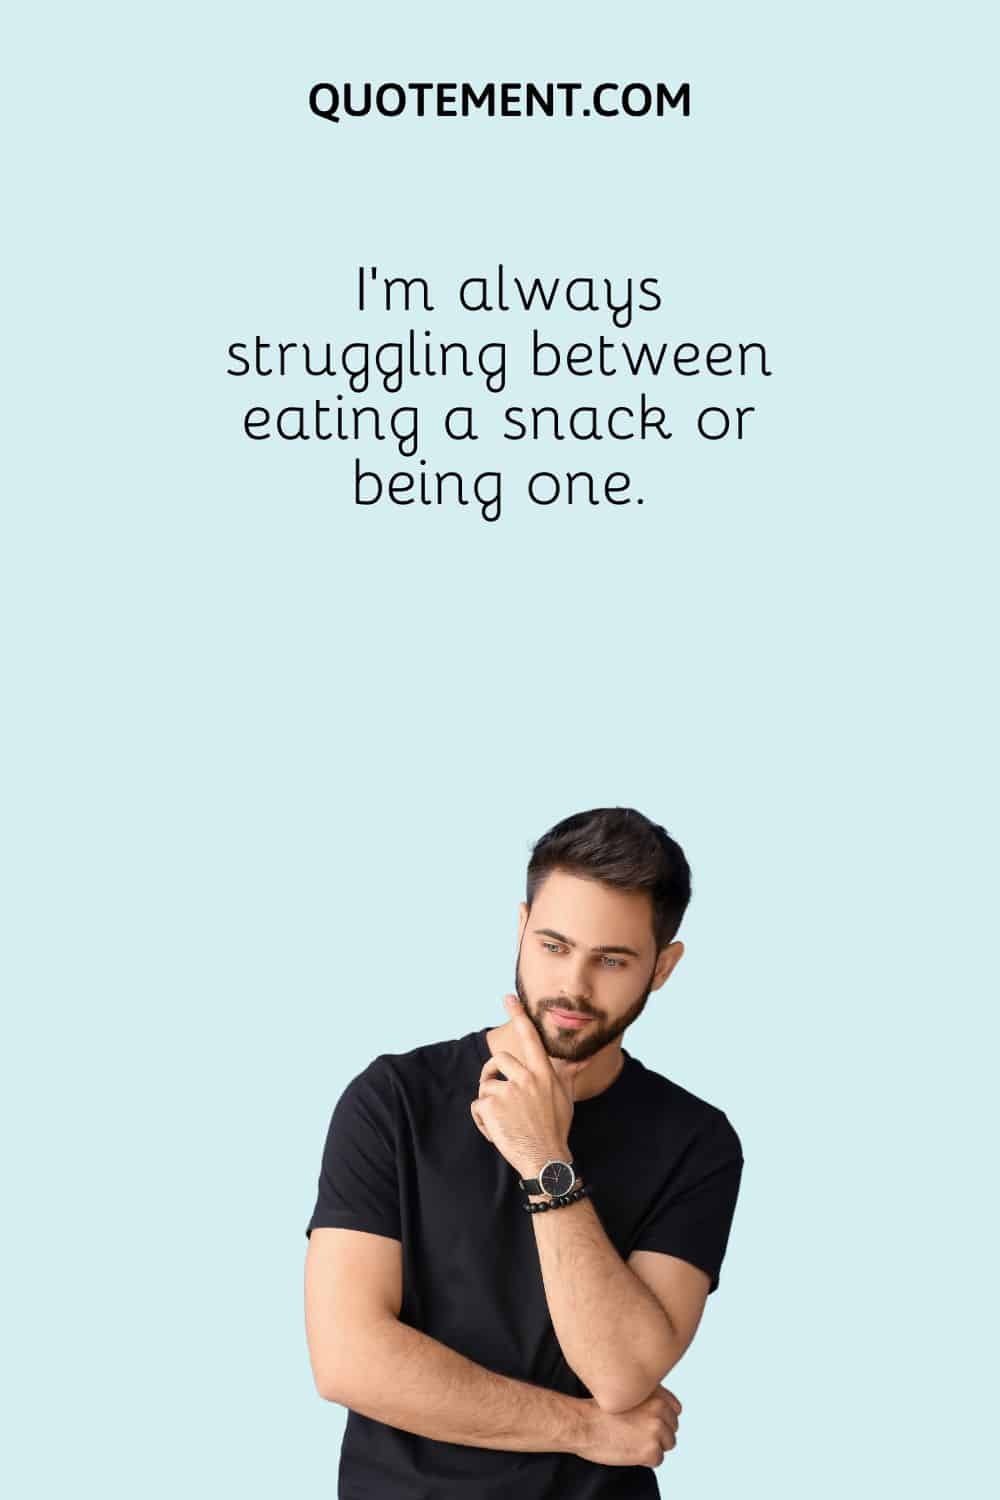 I'm always struggling between eating a snack or being one.